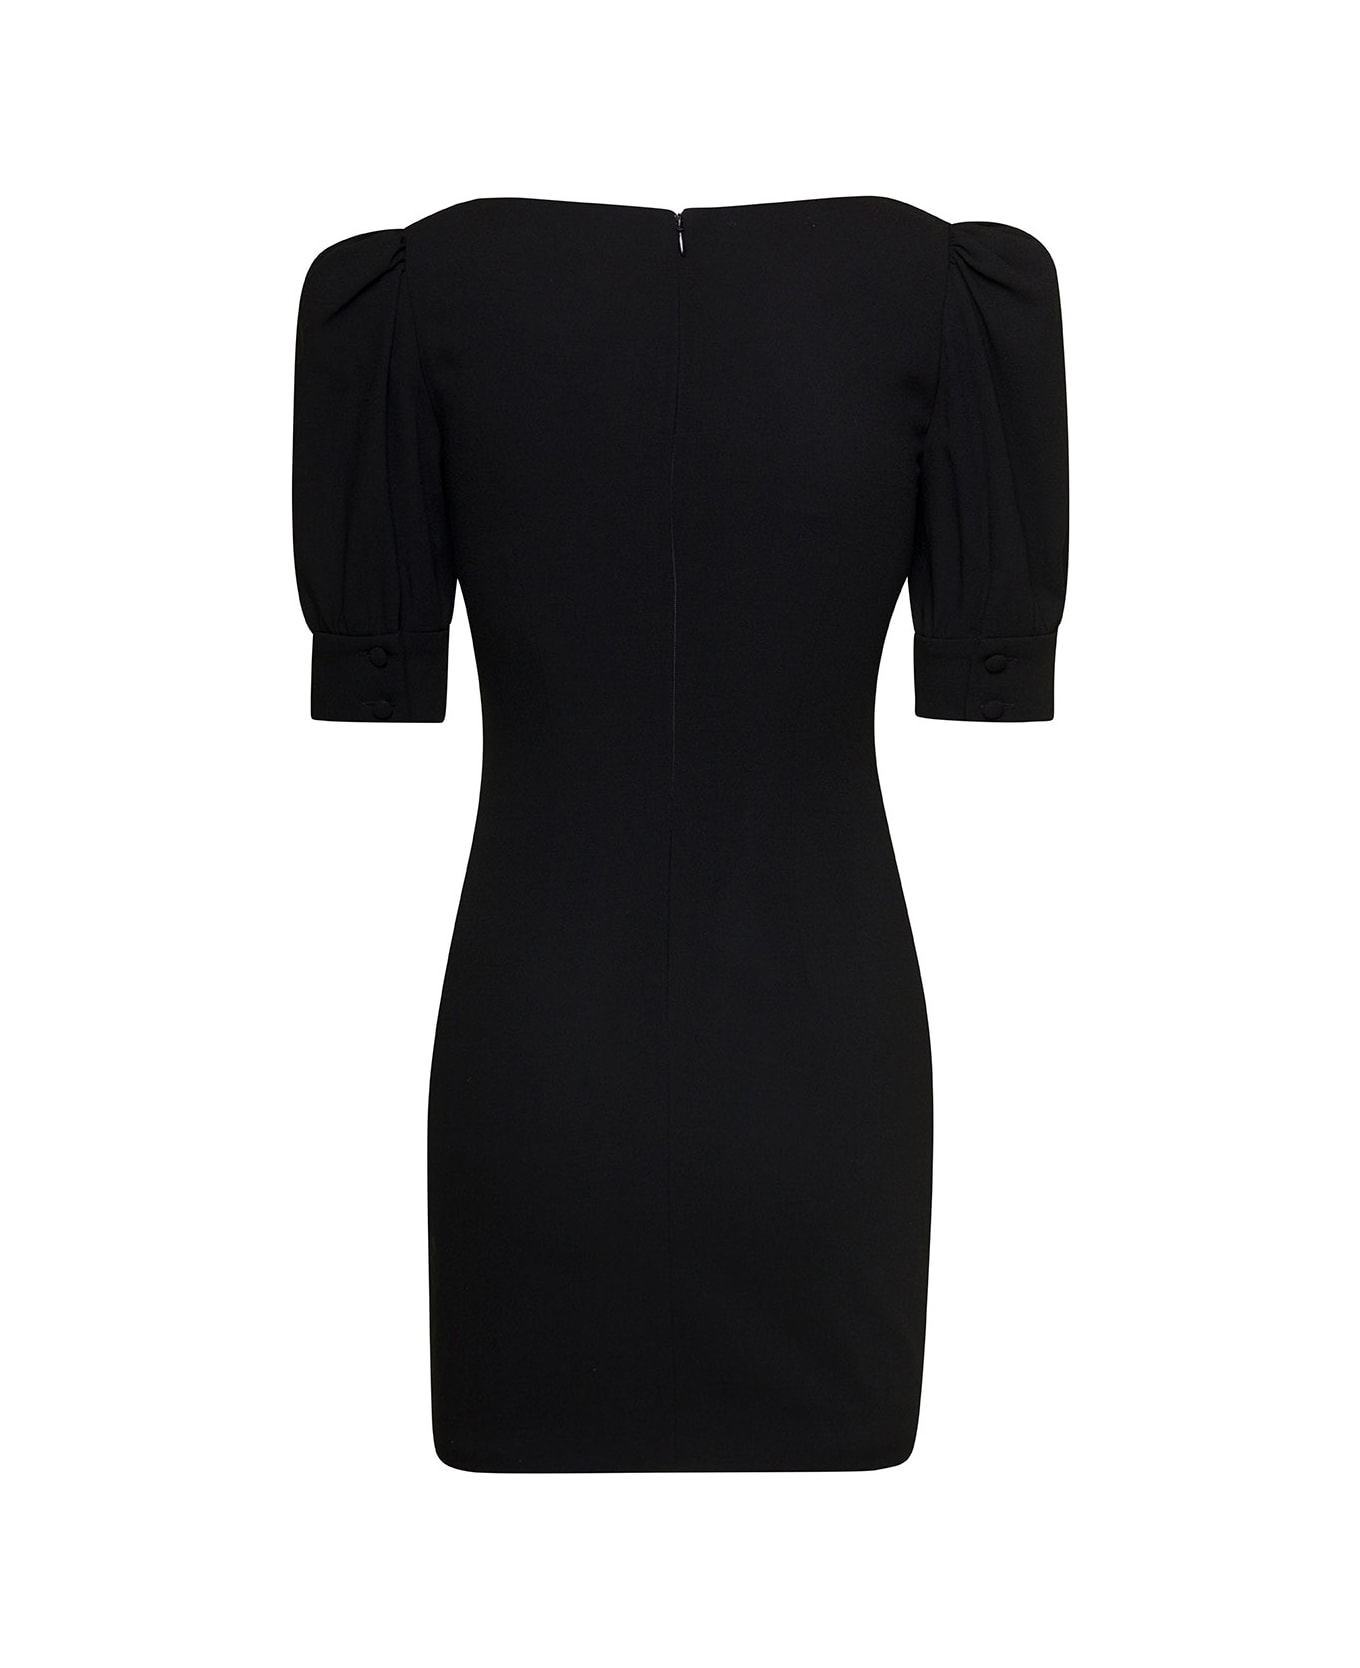 Alessandra Rich Black Mini Dress With Lace Detail On The Front In Wool Woman - Black